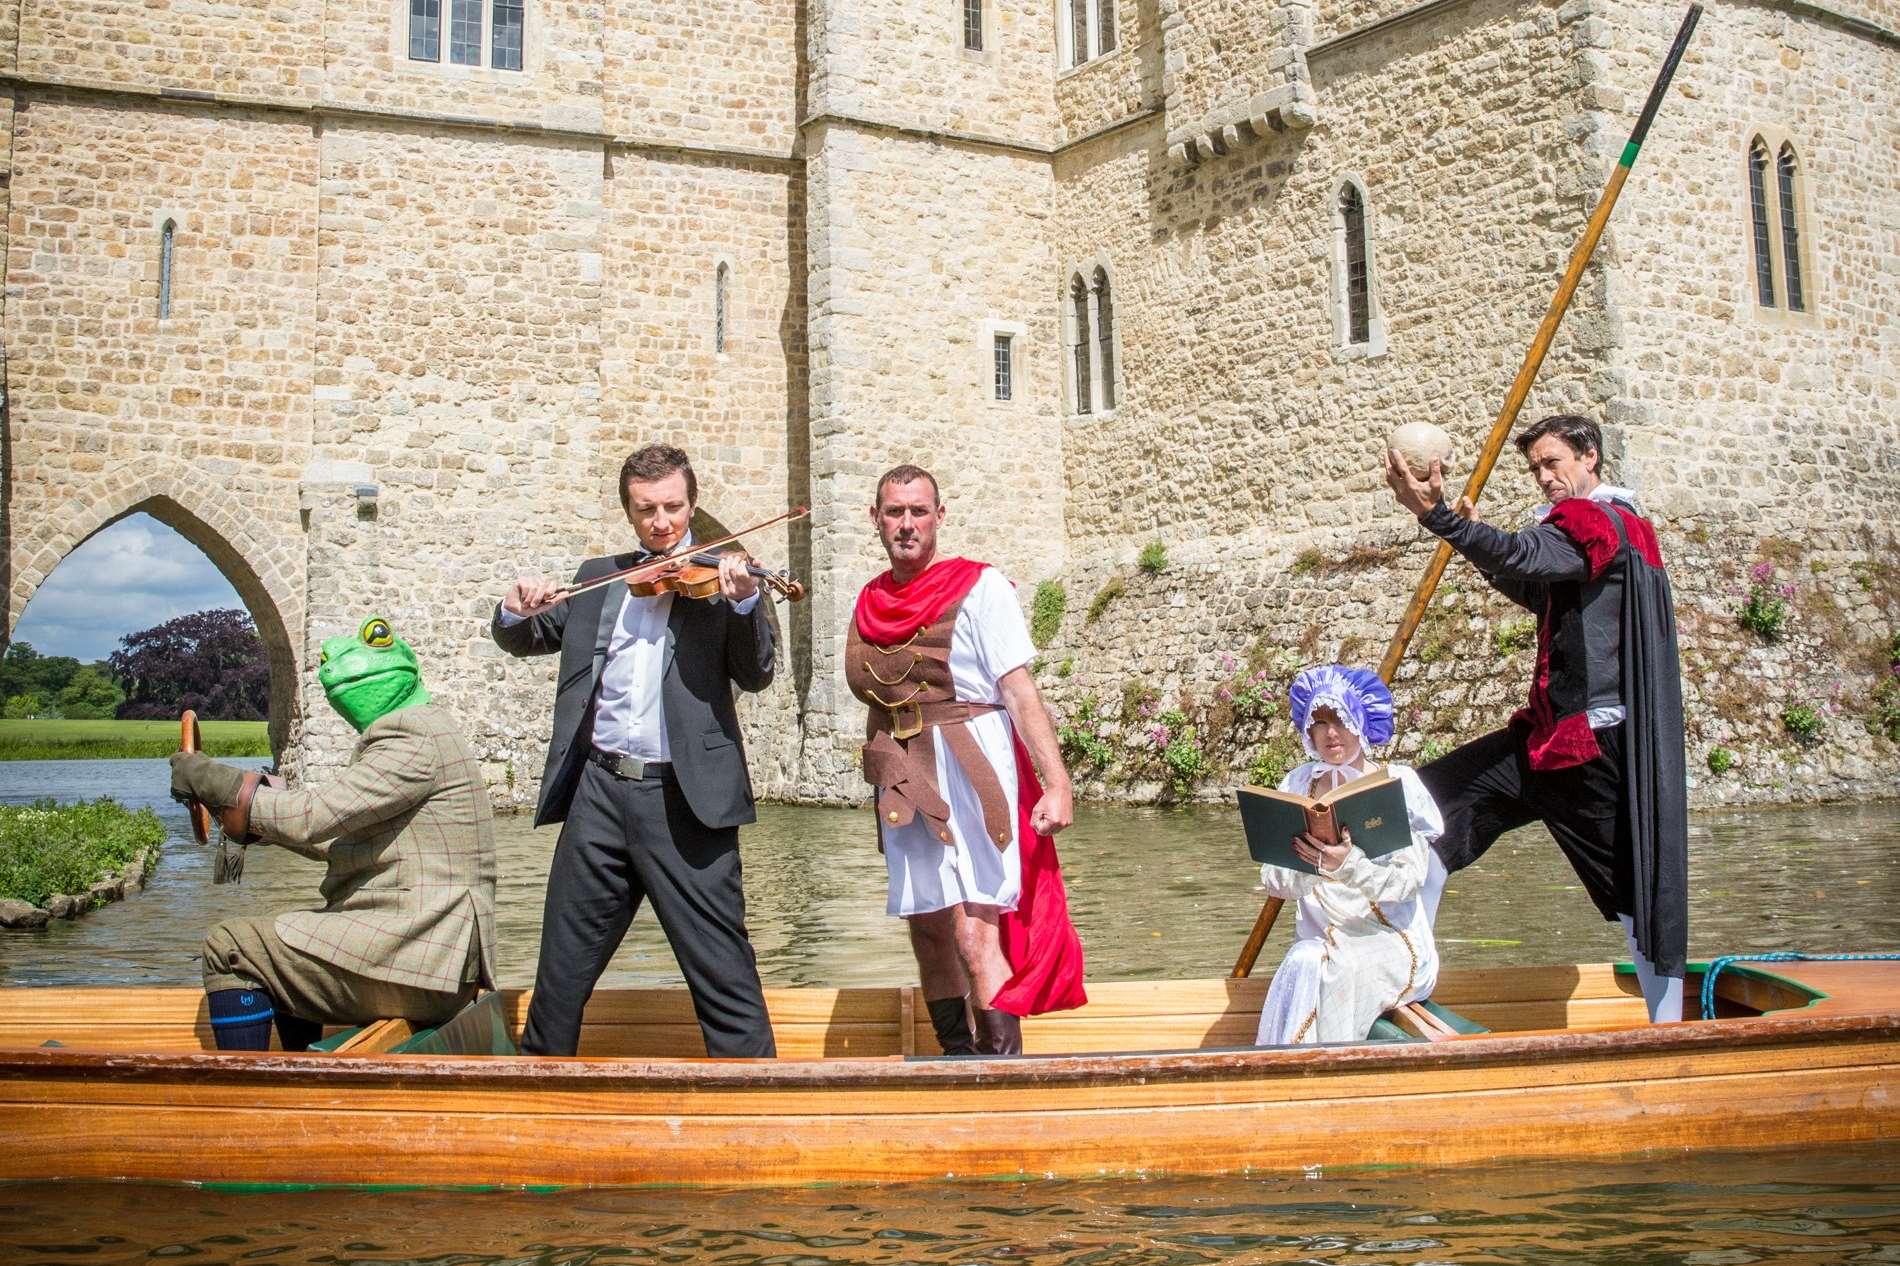 Summertime at Leeds Castle has open air theatre, cinema, shows and events Picture: matthewwalkerphotography.com